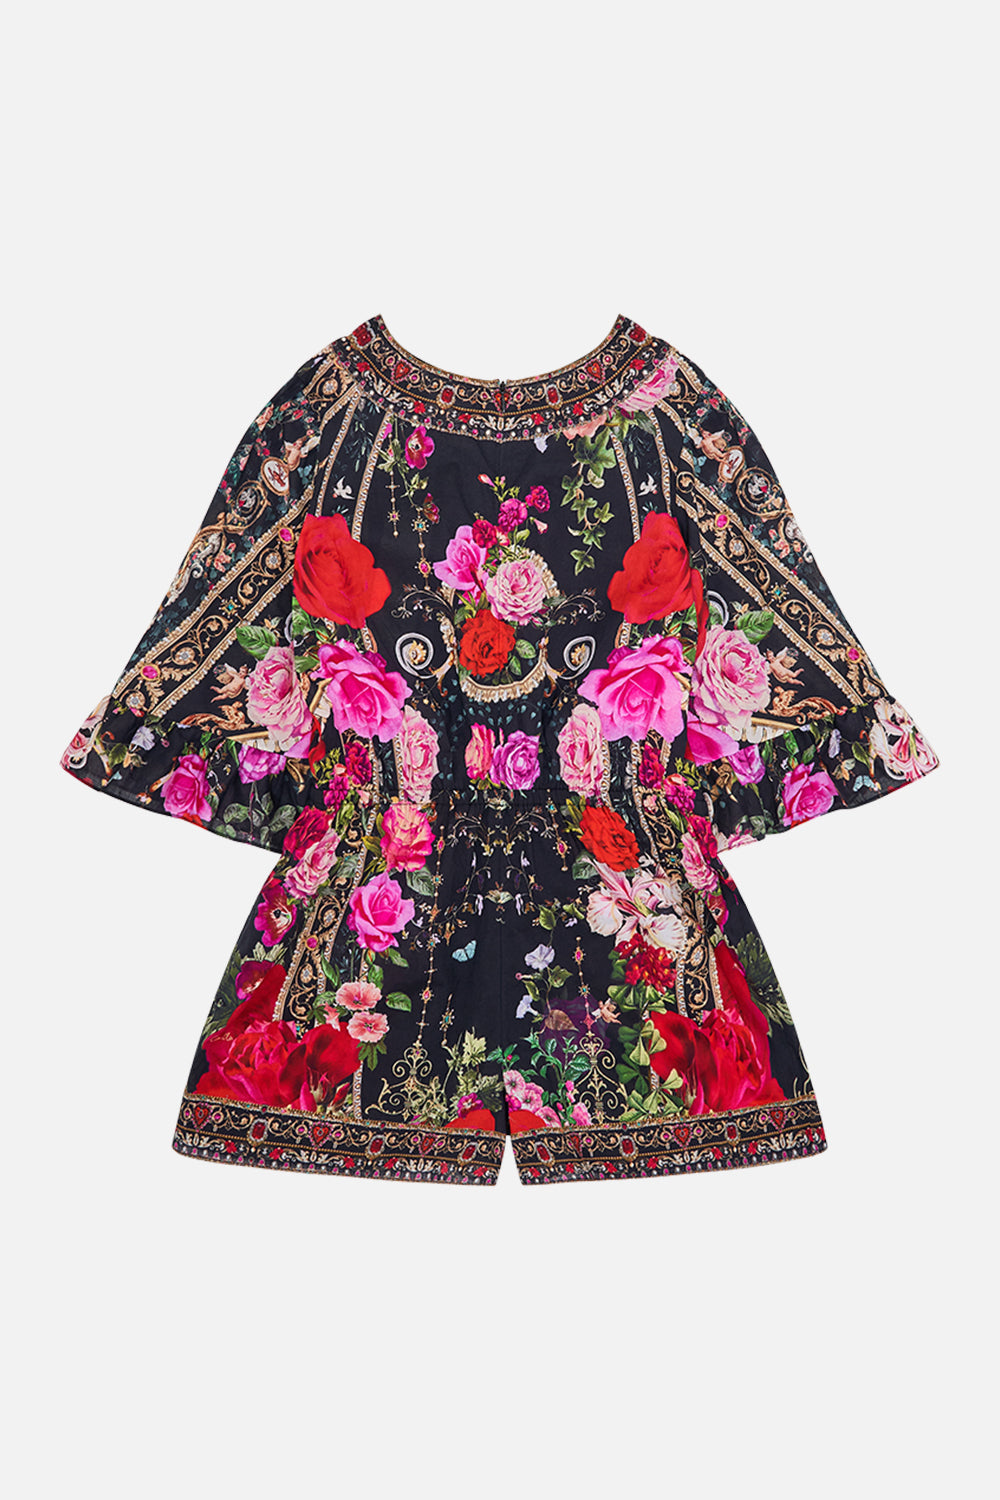 Milla by CAMILLA girls floral playsuit in Reservation For Love print